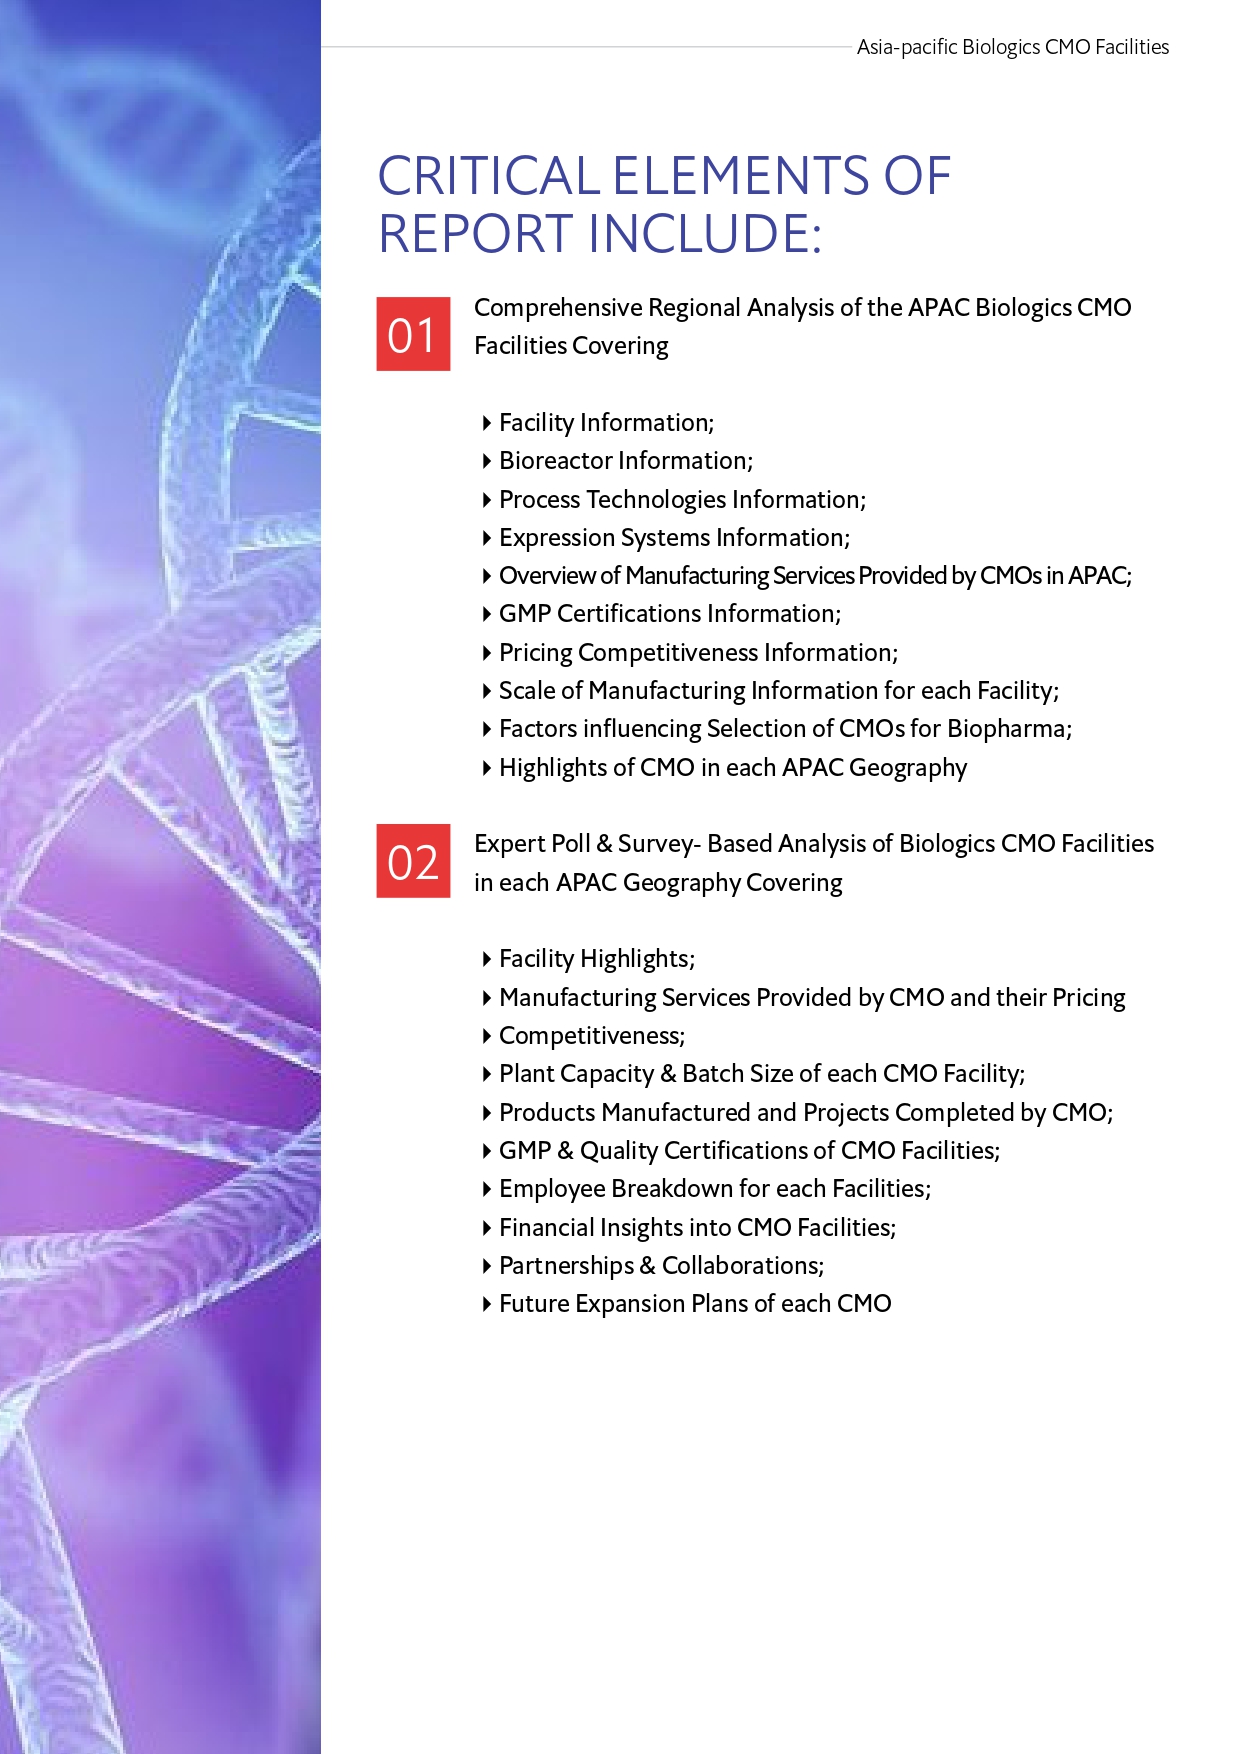 Asia-pacific-Biologics-CMO-Facilities Report Preview- for data sample image – Copy_pages-to-jpg-0002